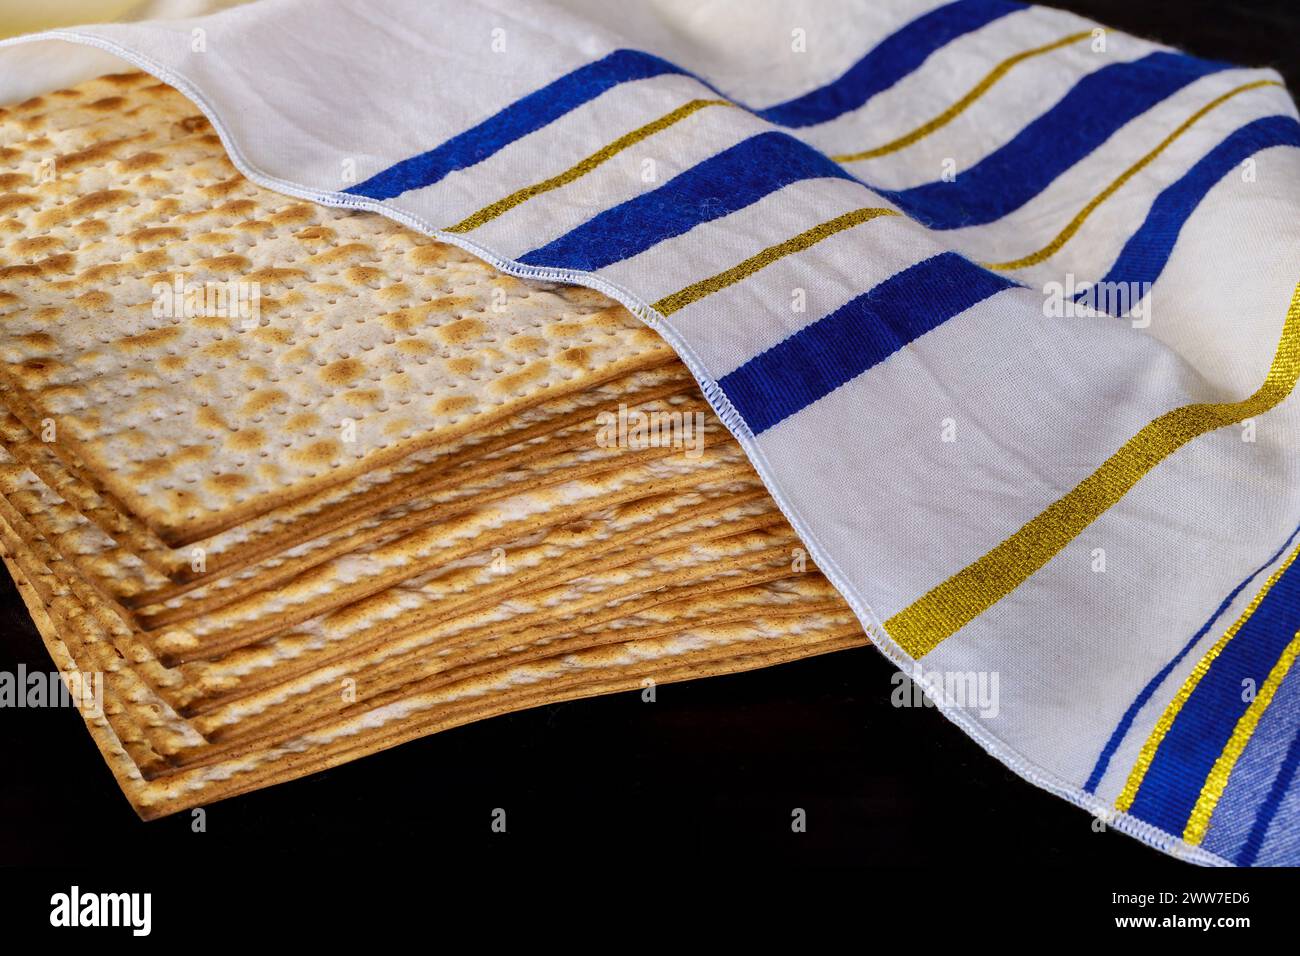 Passover celebration setting table with matzah bread for Jewish holiday Stock Photo